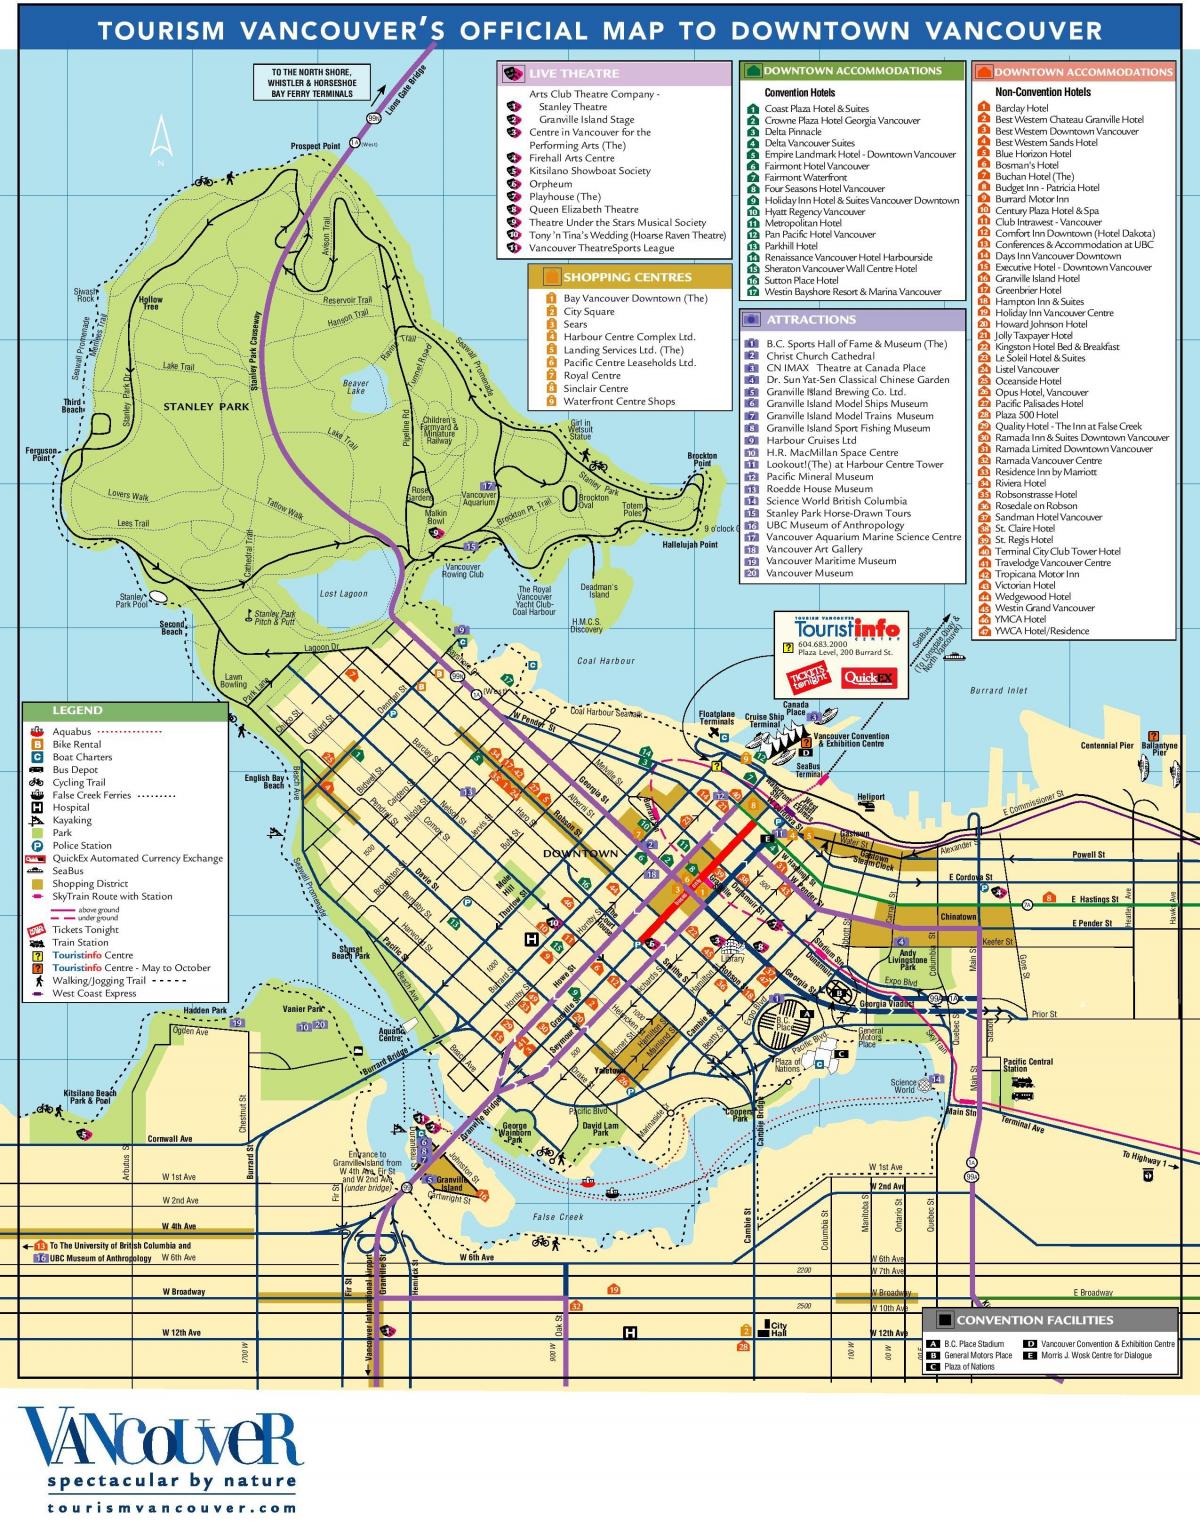 Vancouver sightseeing map